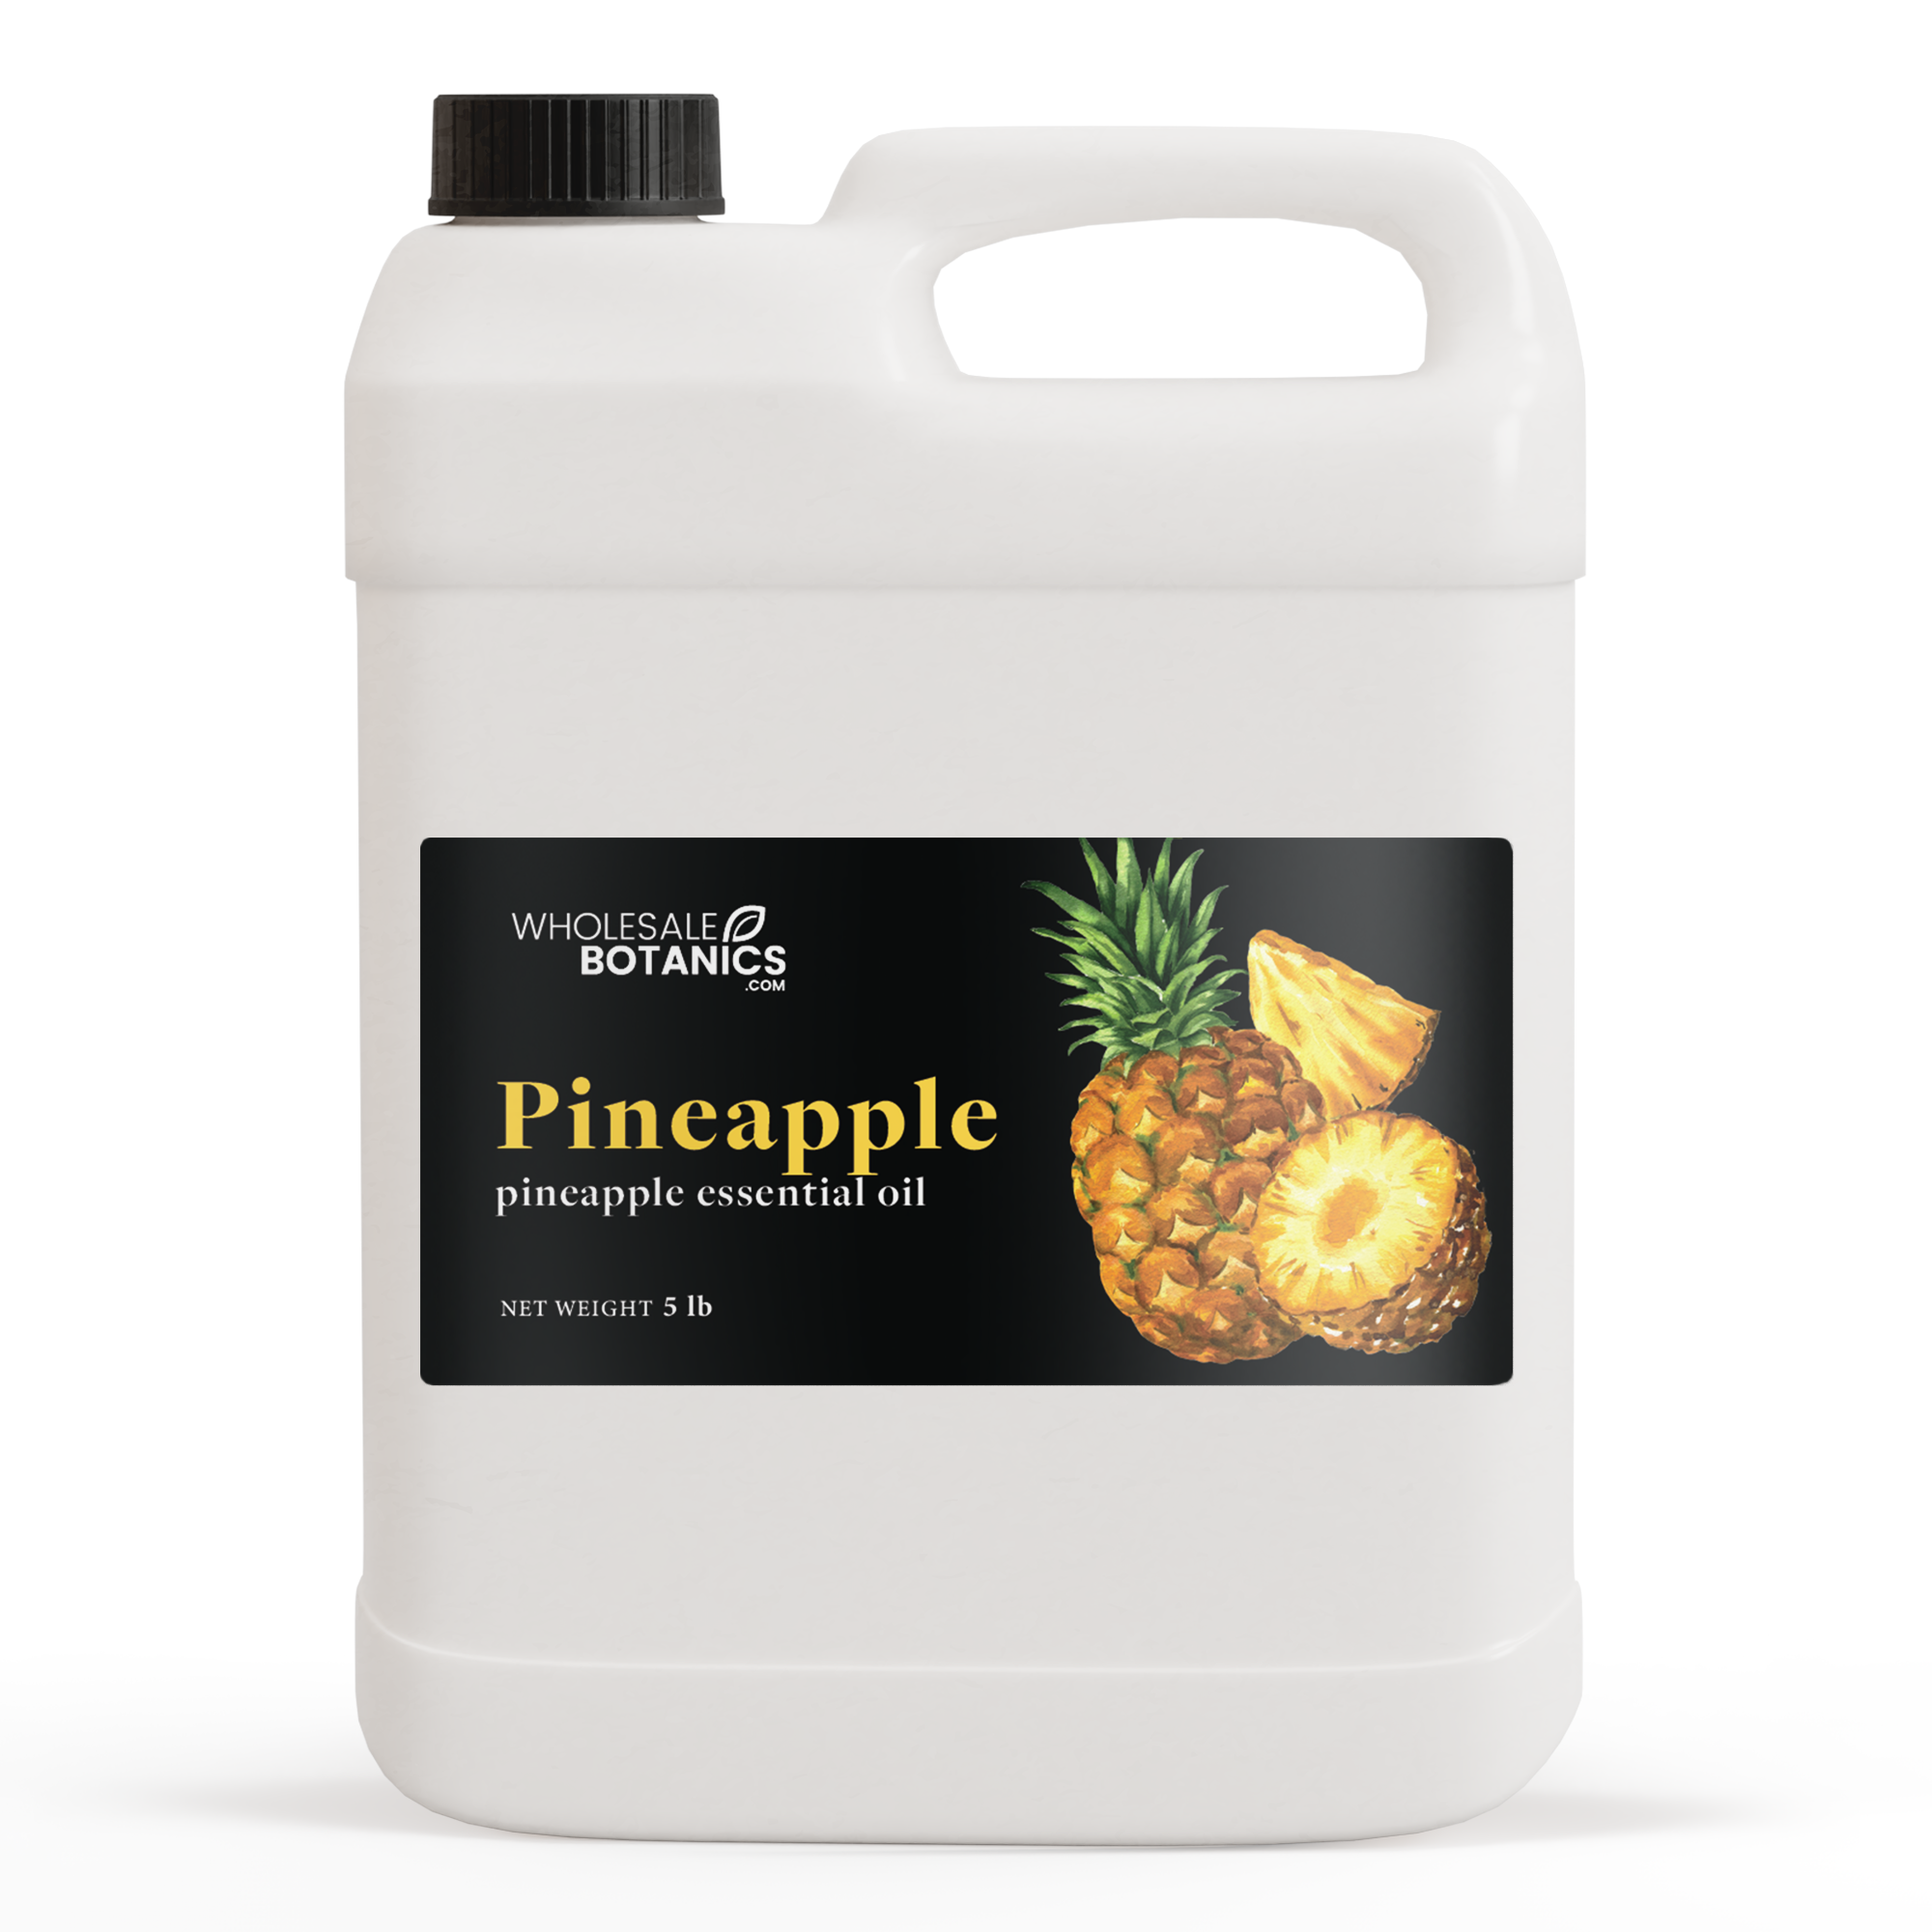 2-Pack Pineapple Essential Oil 100% Pure Oganic Plant Natrual Flower  Essential Oil for Diffuser Message Skin Care - 10ML